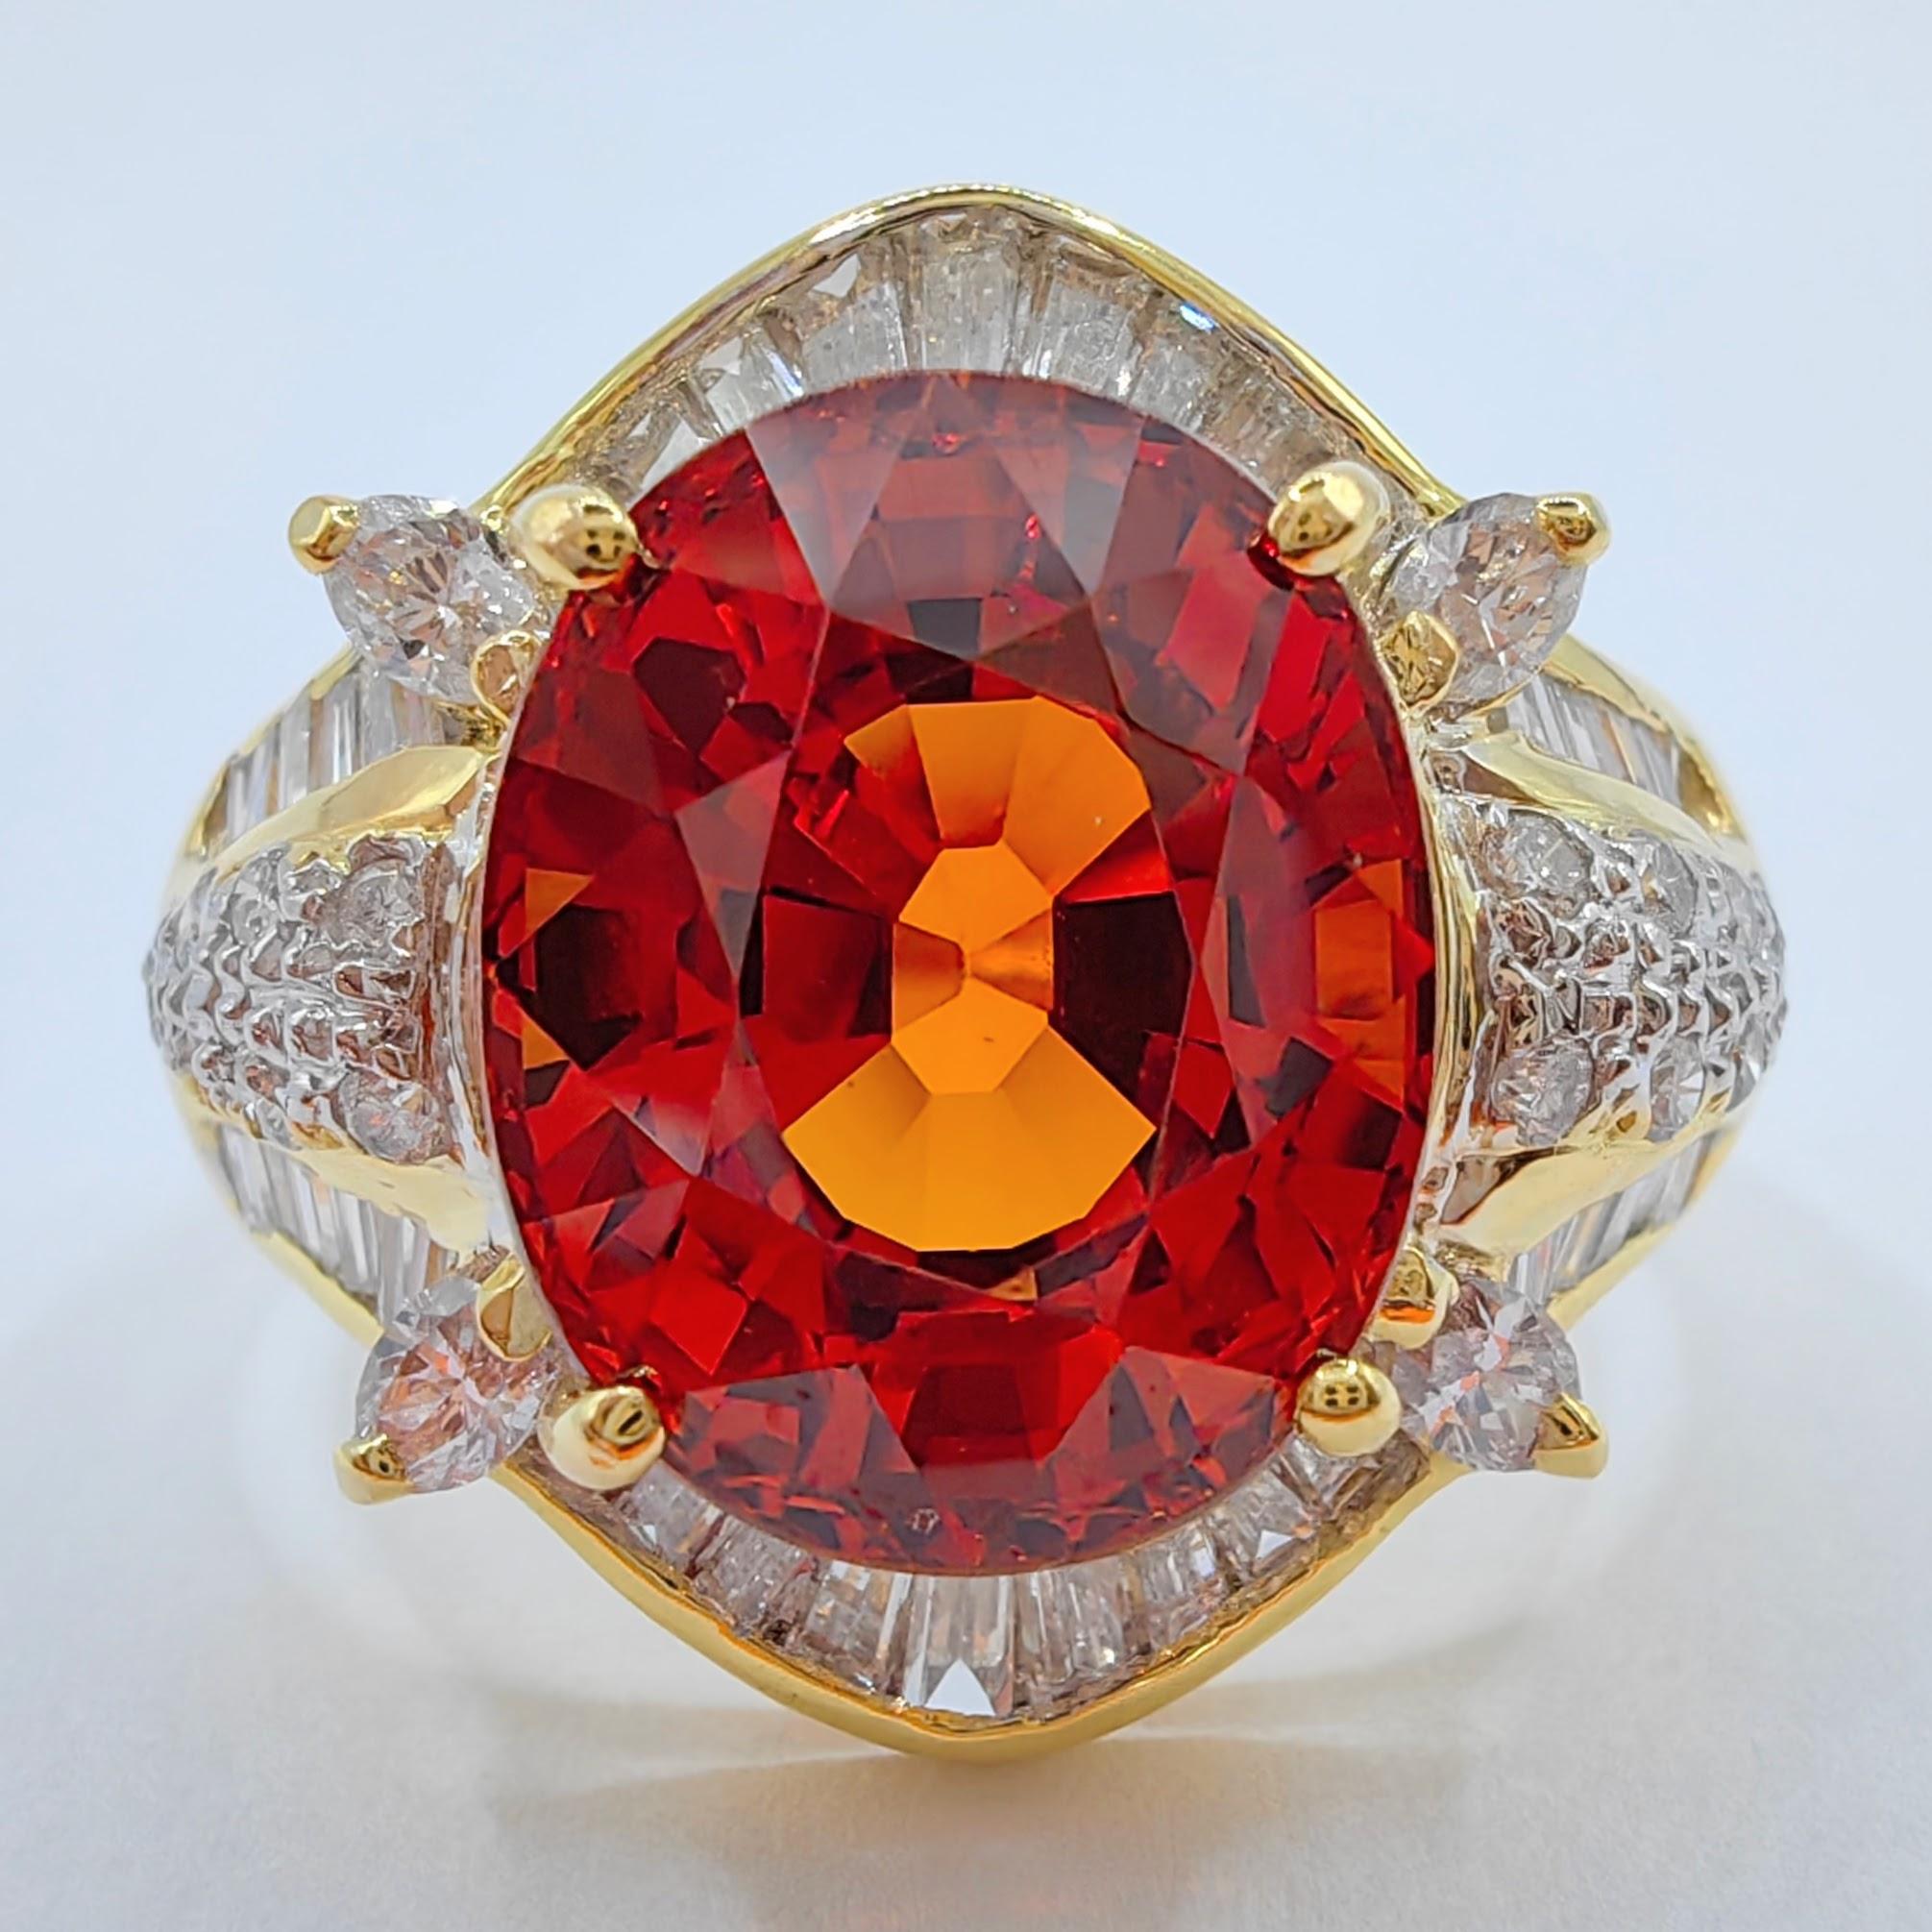 Indulge in the luxurious charm of this exceptional Vintage 7.1 Carat Orange Mandarin Spessartine Garnet Diamond Ring. The vibrant orange hue of the Spessartine Garnet is both rare and spectacular, showcasing a unique saturation and intensity that